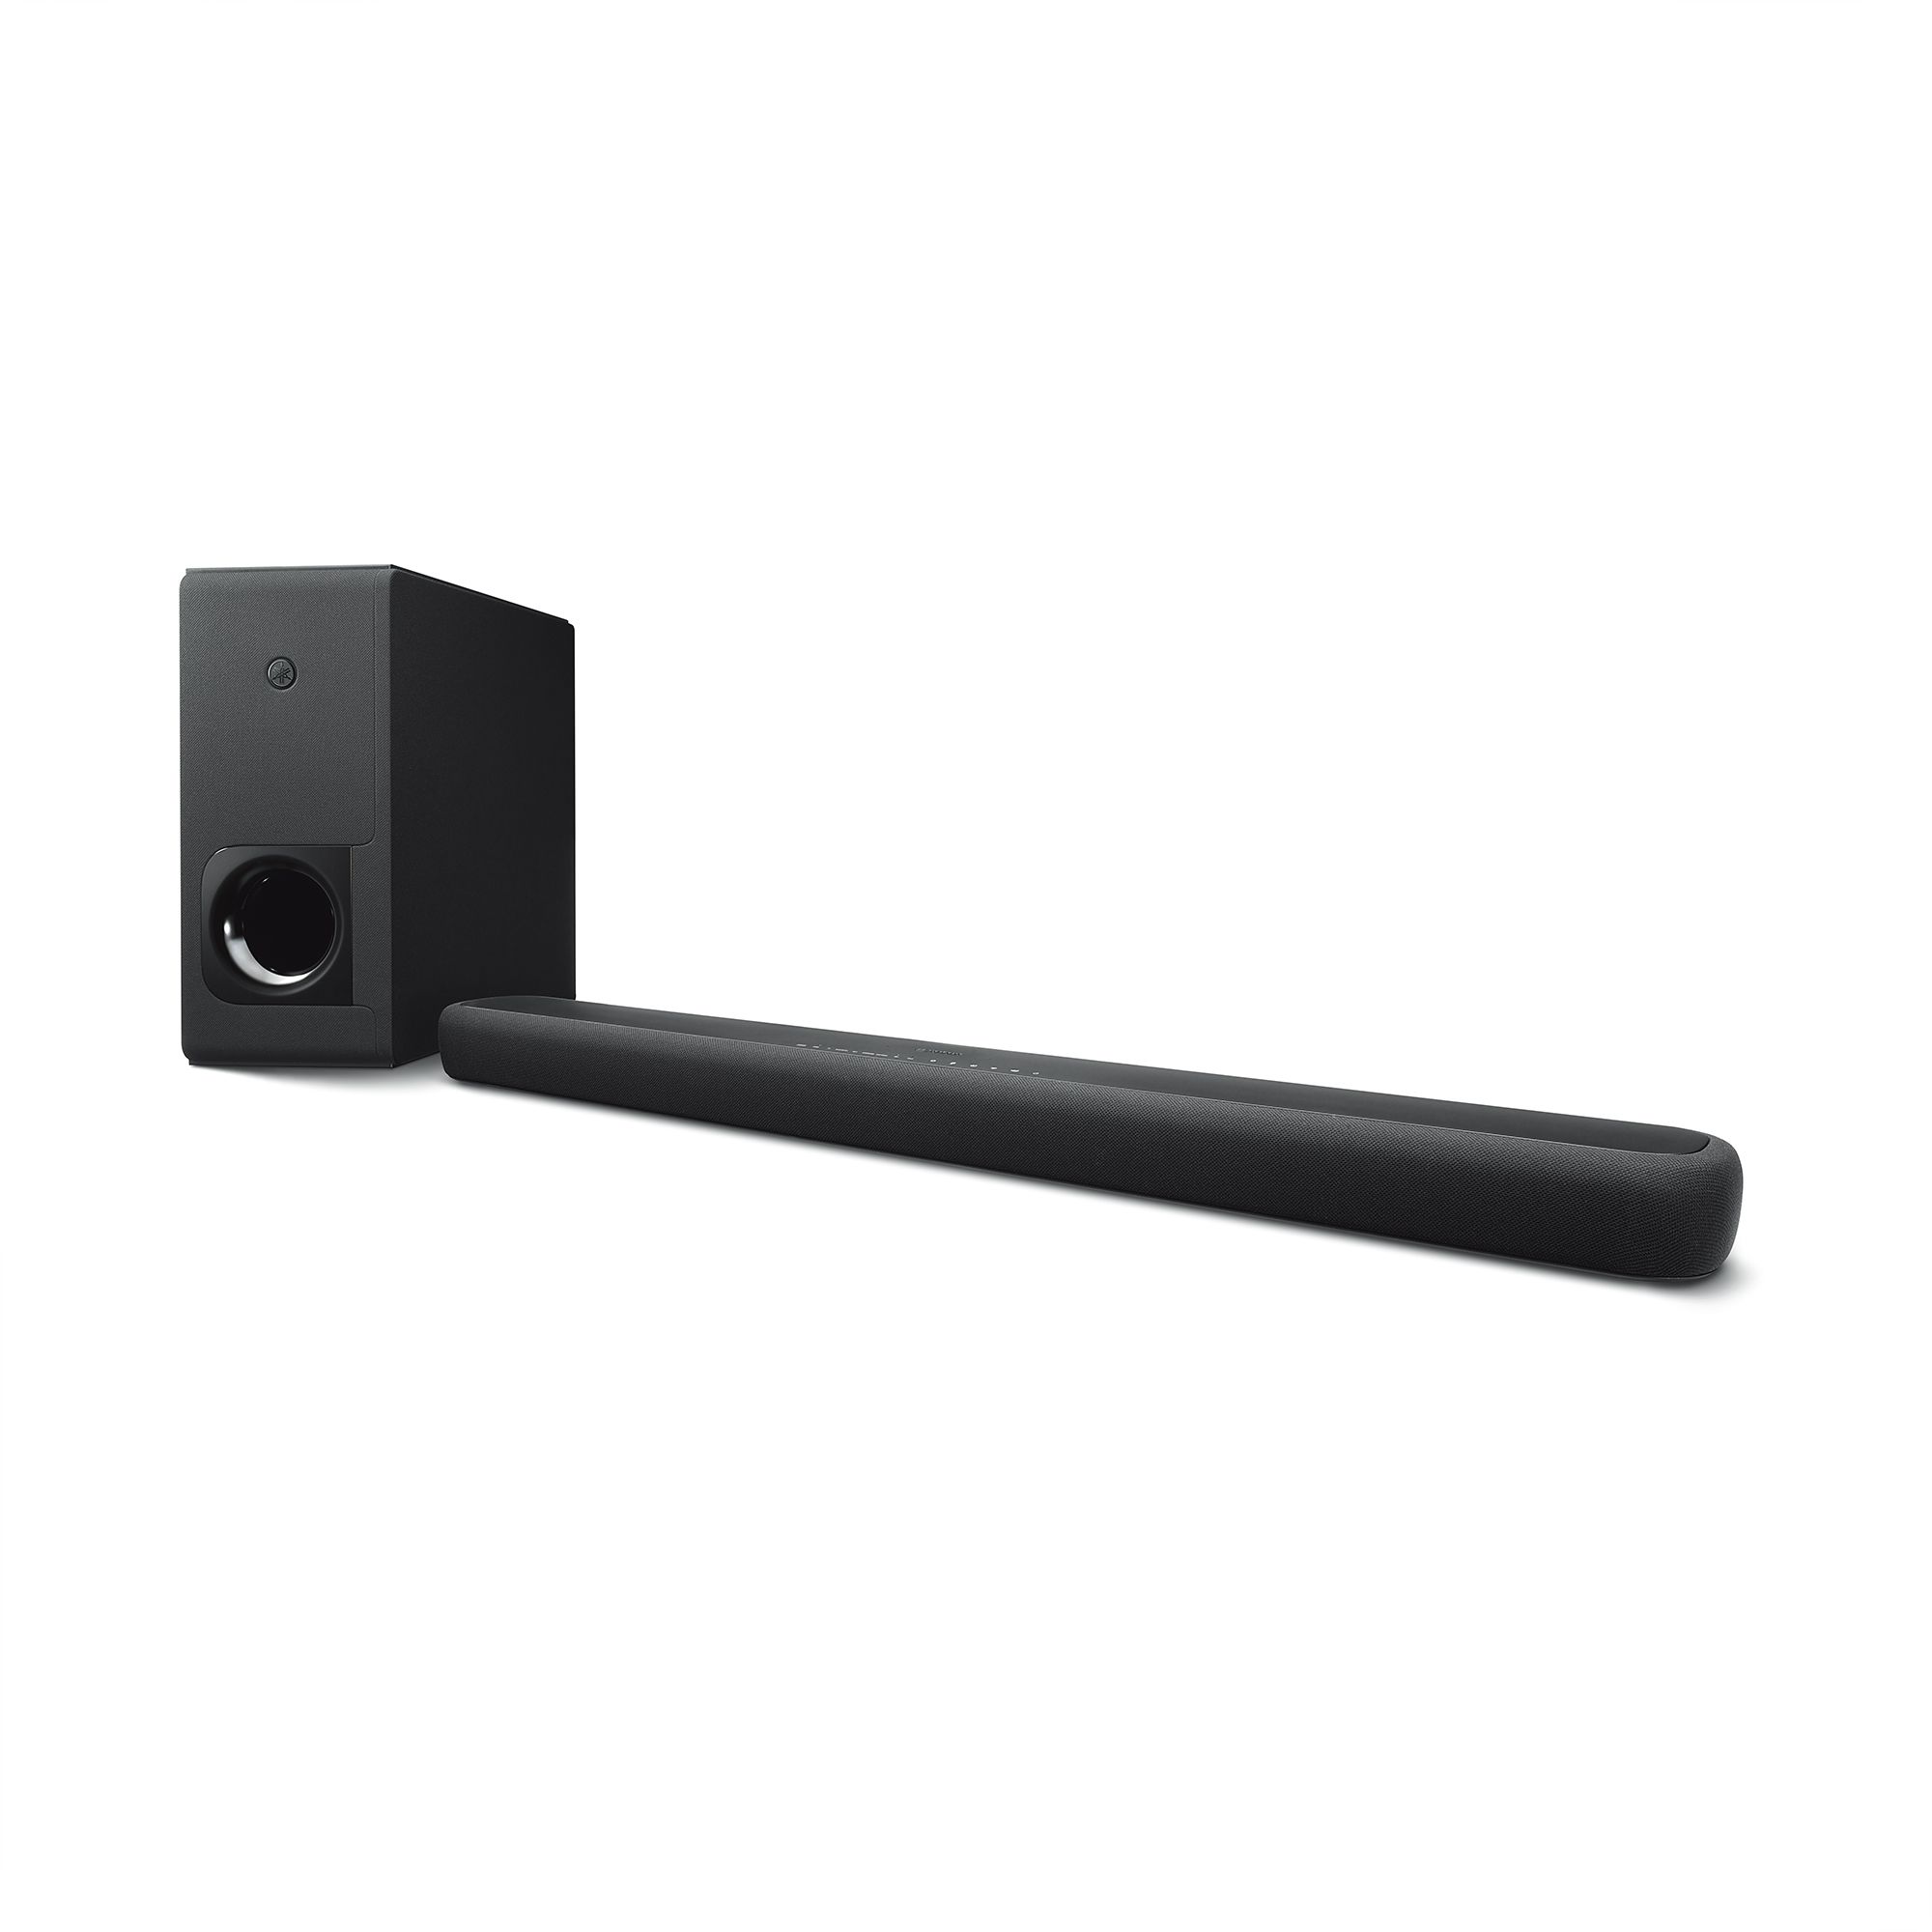 YAS-209 - Overview - Sound Bar - Audio & Visual - Products 